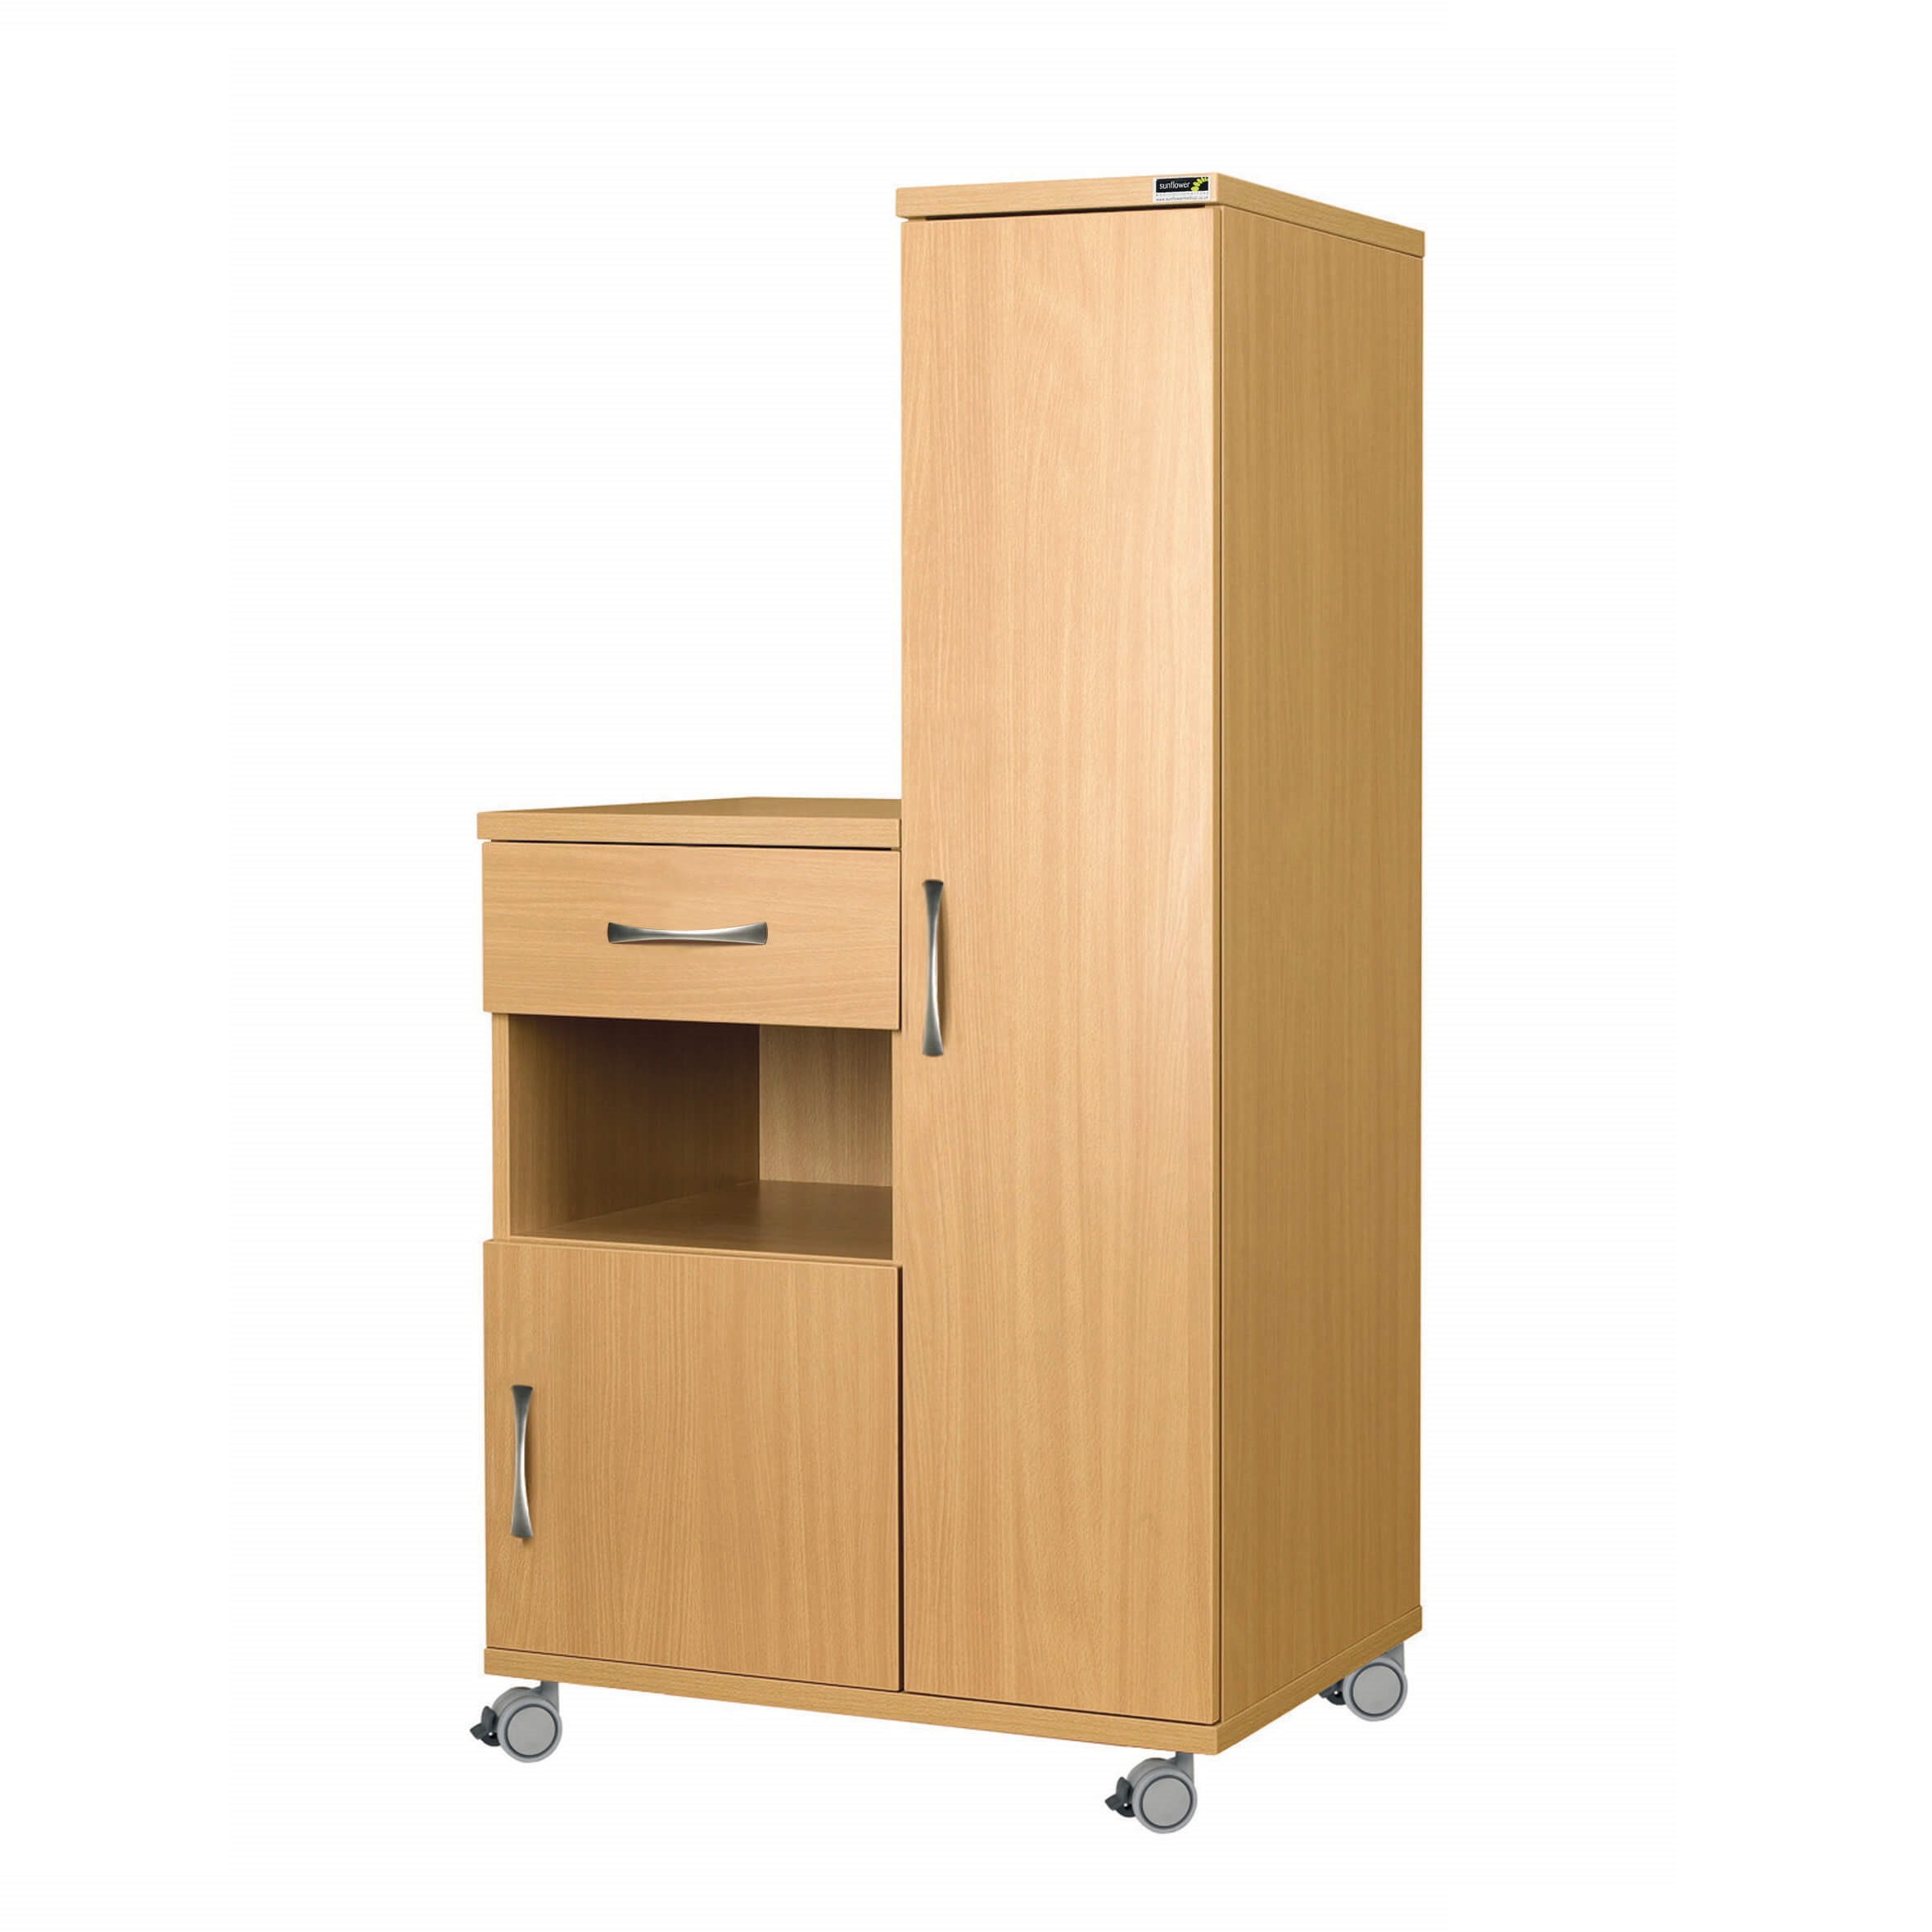 Right Hand Bedside Cabinet Combination Unit - MFC Material [Sun-CBHBC5-MFC]